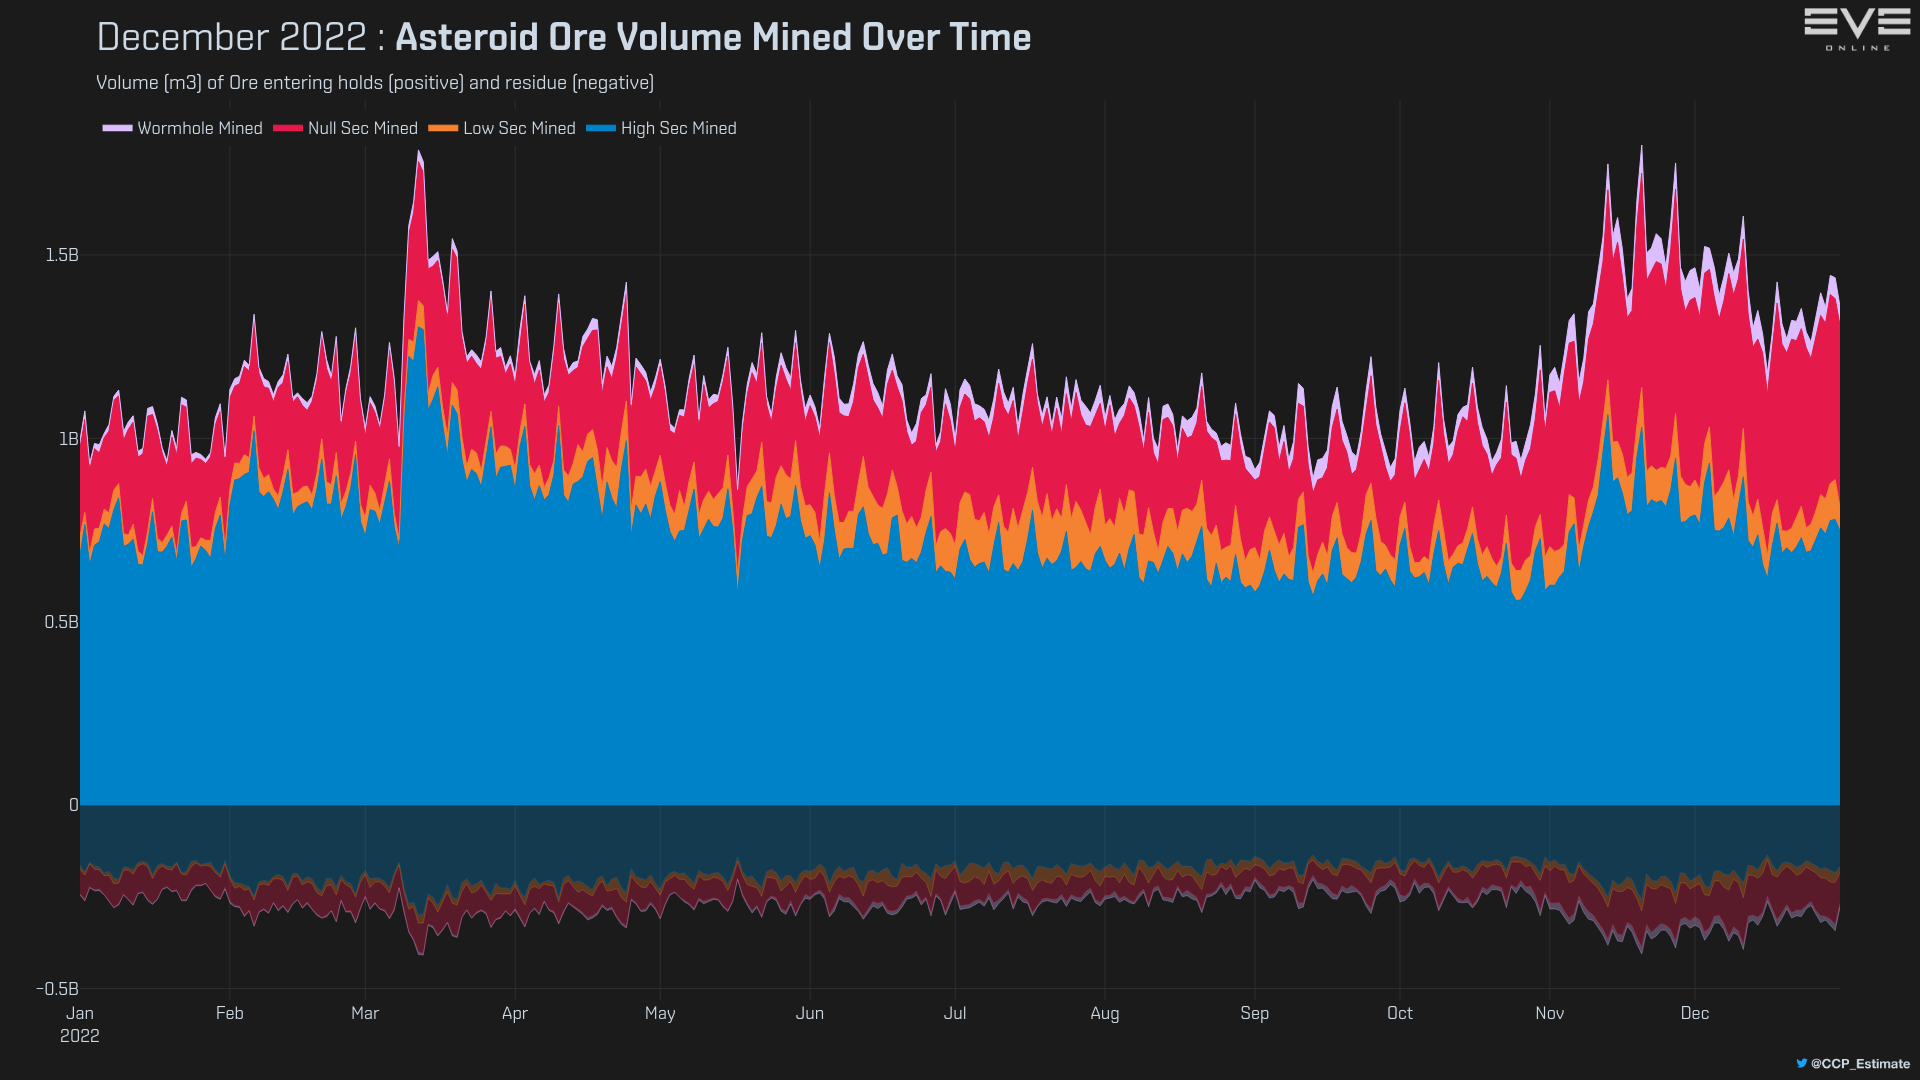 3_asteroid_ore_volume_history.png